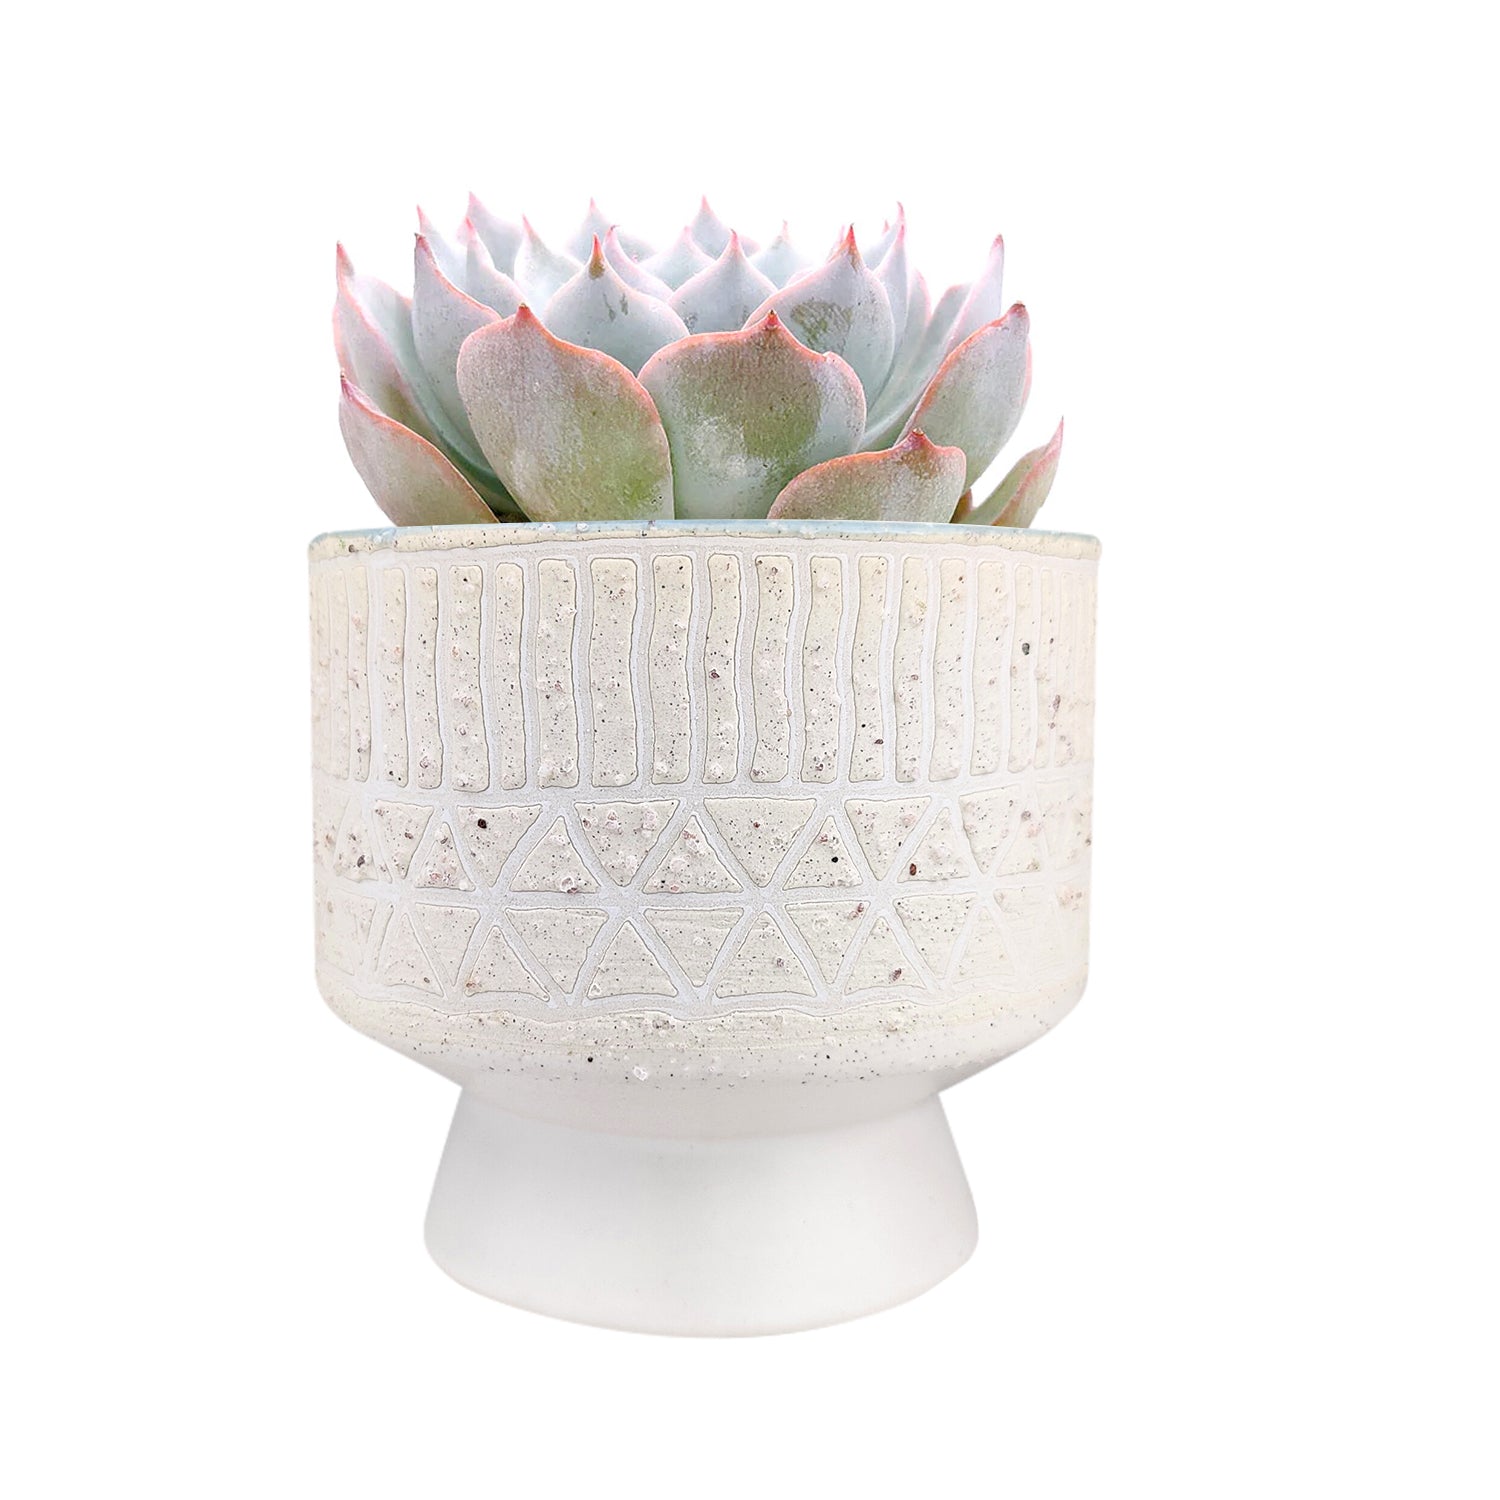 Cream Umbra Footed Pot, 3 inch ceramic pot for decoration, bohemian ceramic pots, small ceramic pots for succulents and cacti, succulent pot for sale